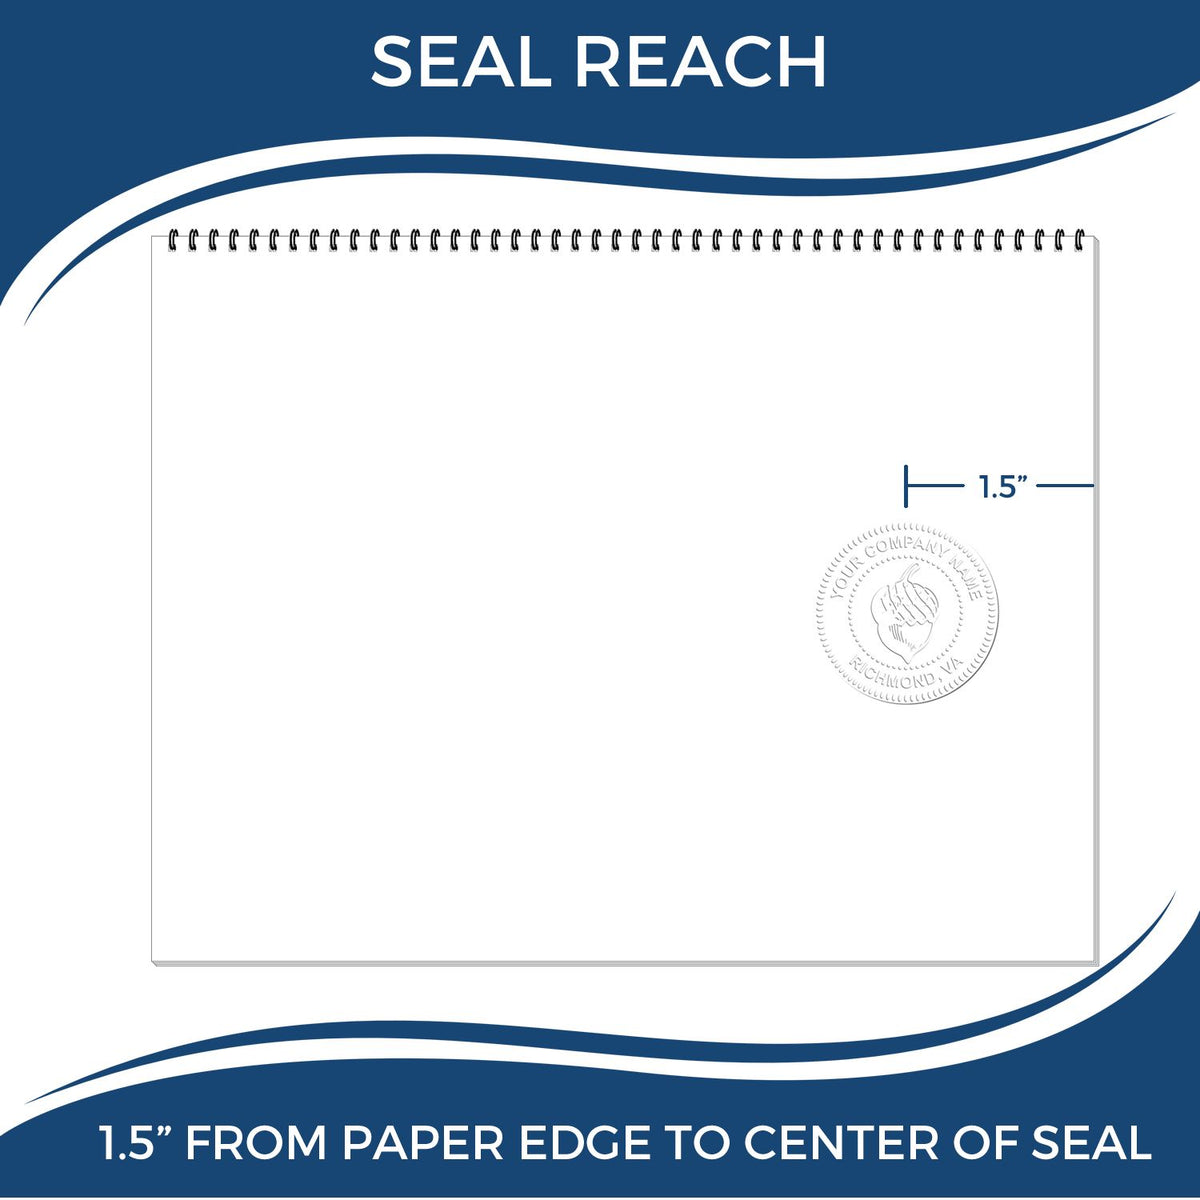 An infographic showing the seal reach which is represented by a ruler and a miniature seal image of the State of Delaware Soft Land Surveyor Embossing Seal